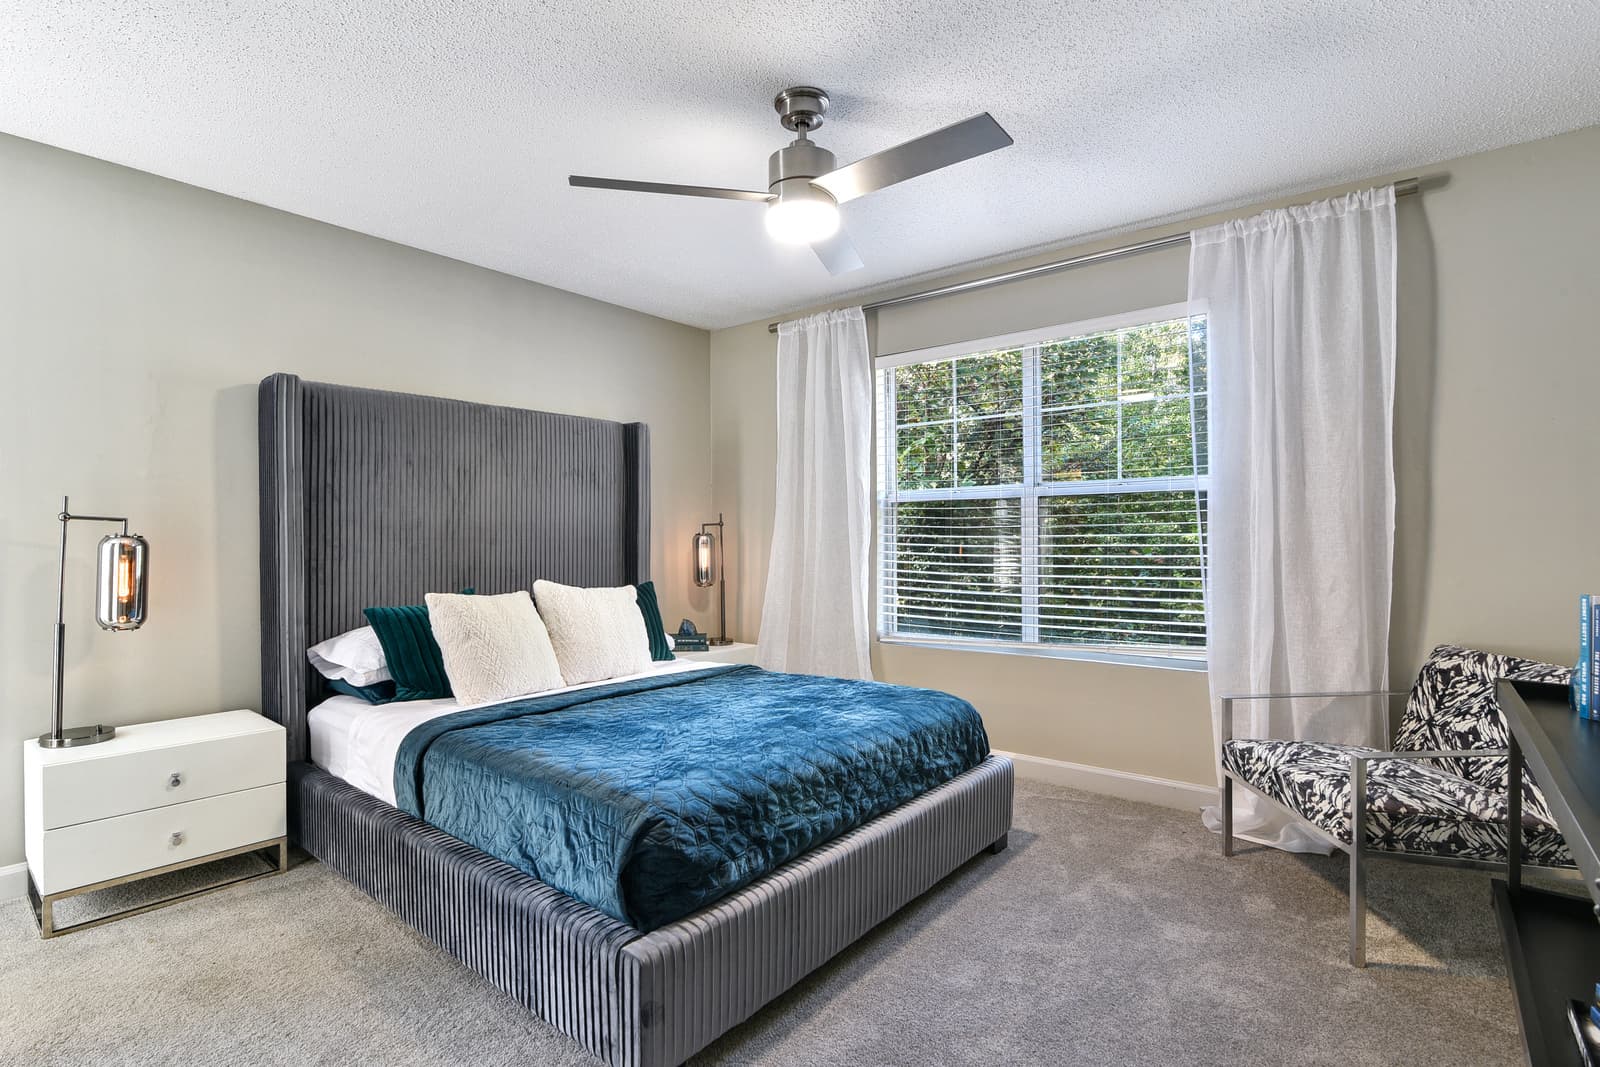 fully furnished bedroom with modern ceiling fan and large window